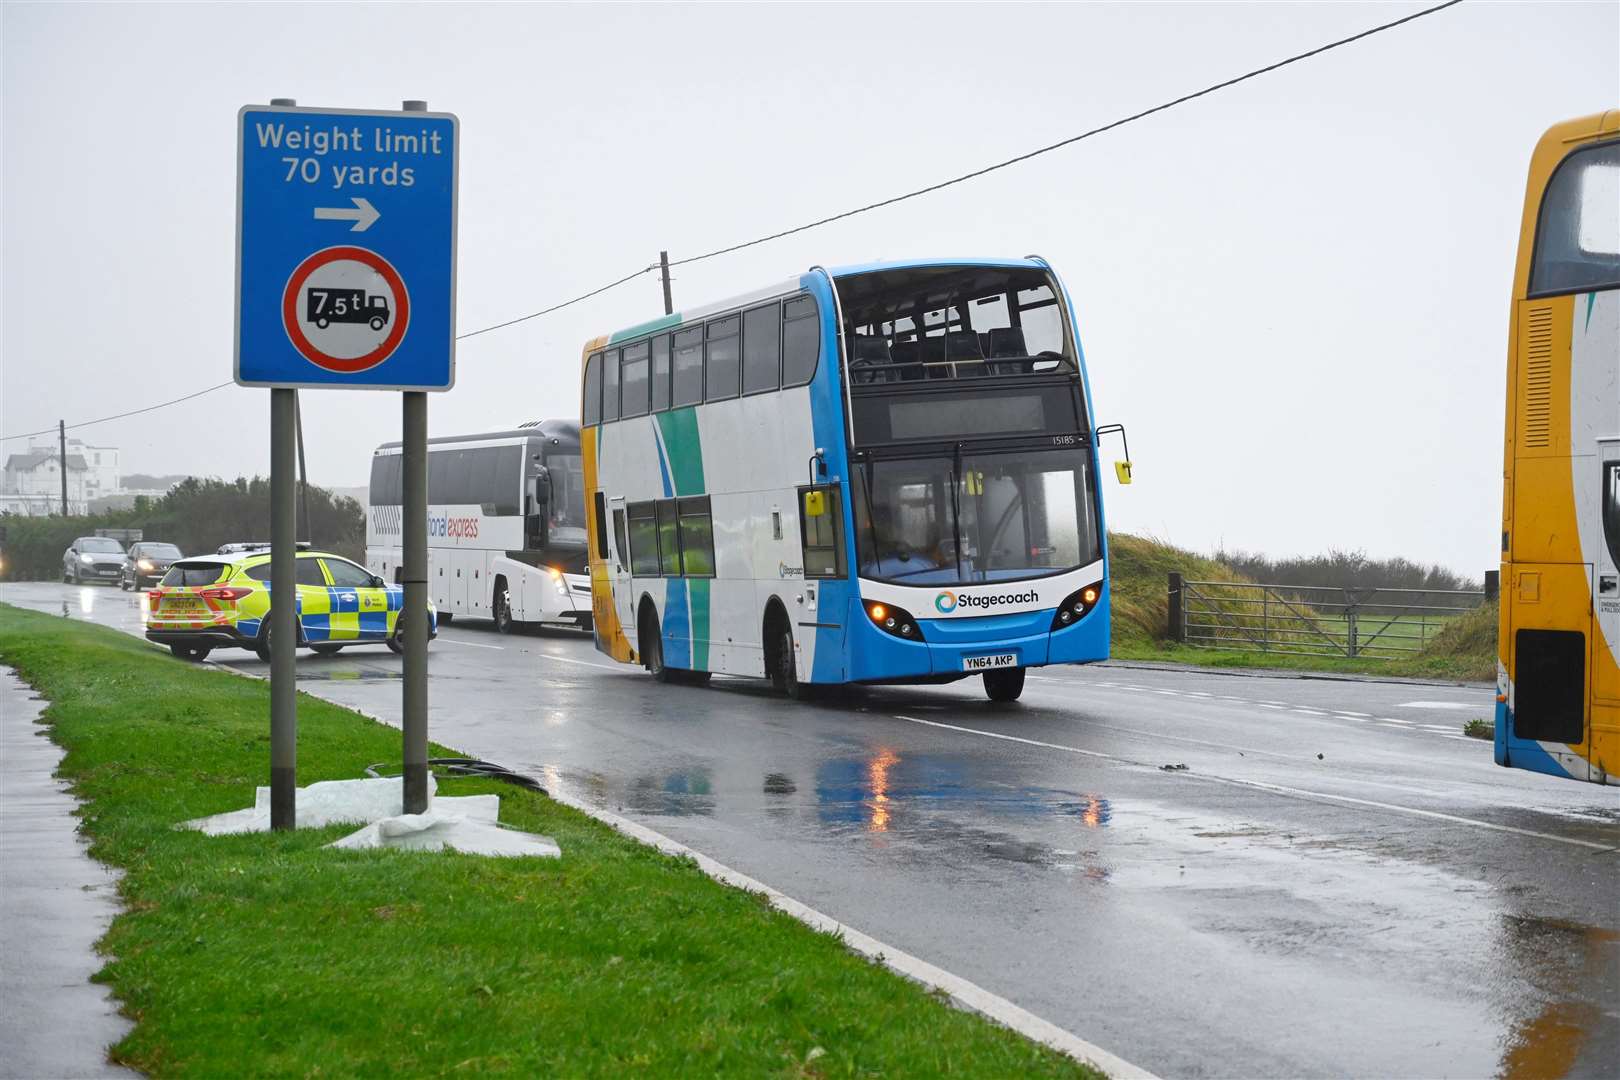 The wind lifted the bus and there was a risk of it being blown over. Picture: Barry Goodwin